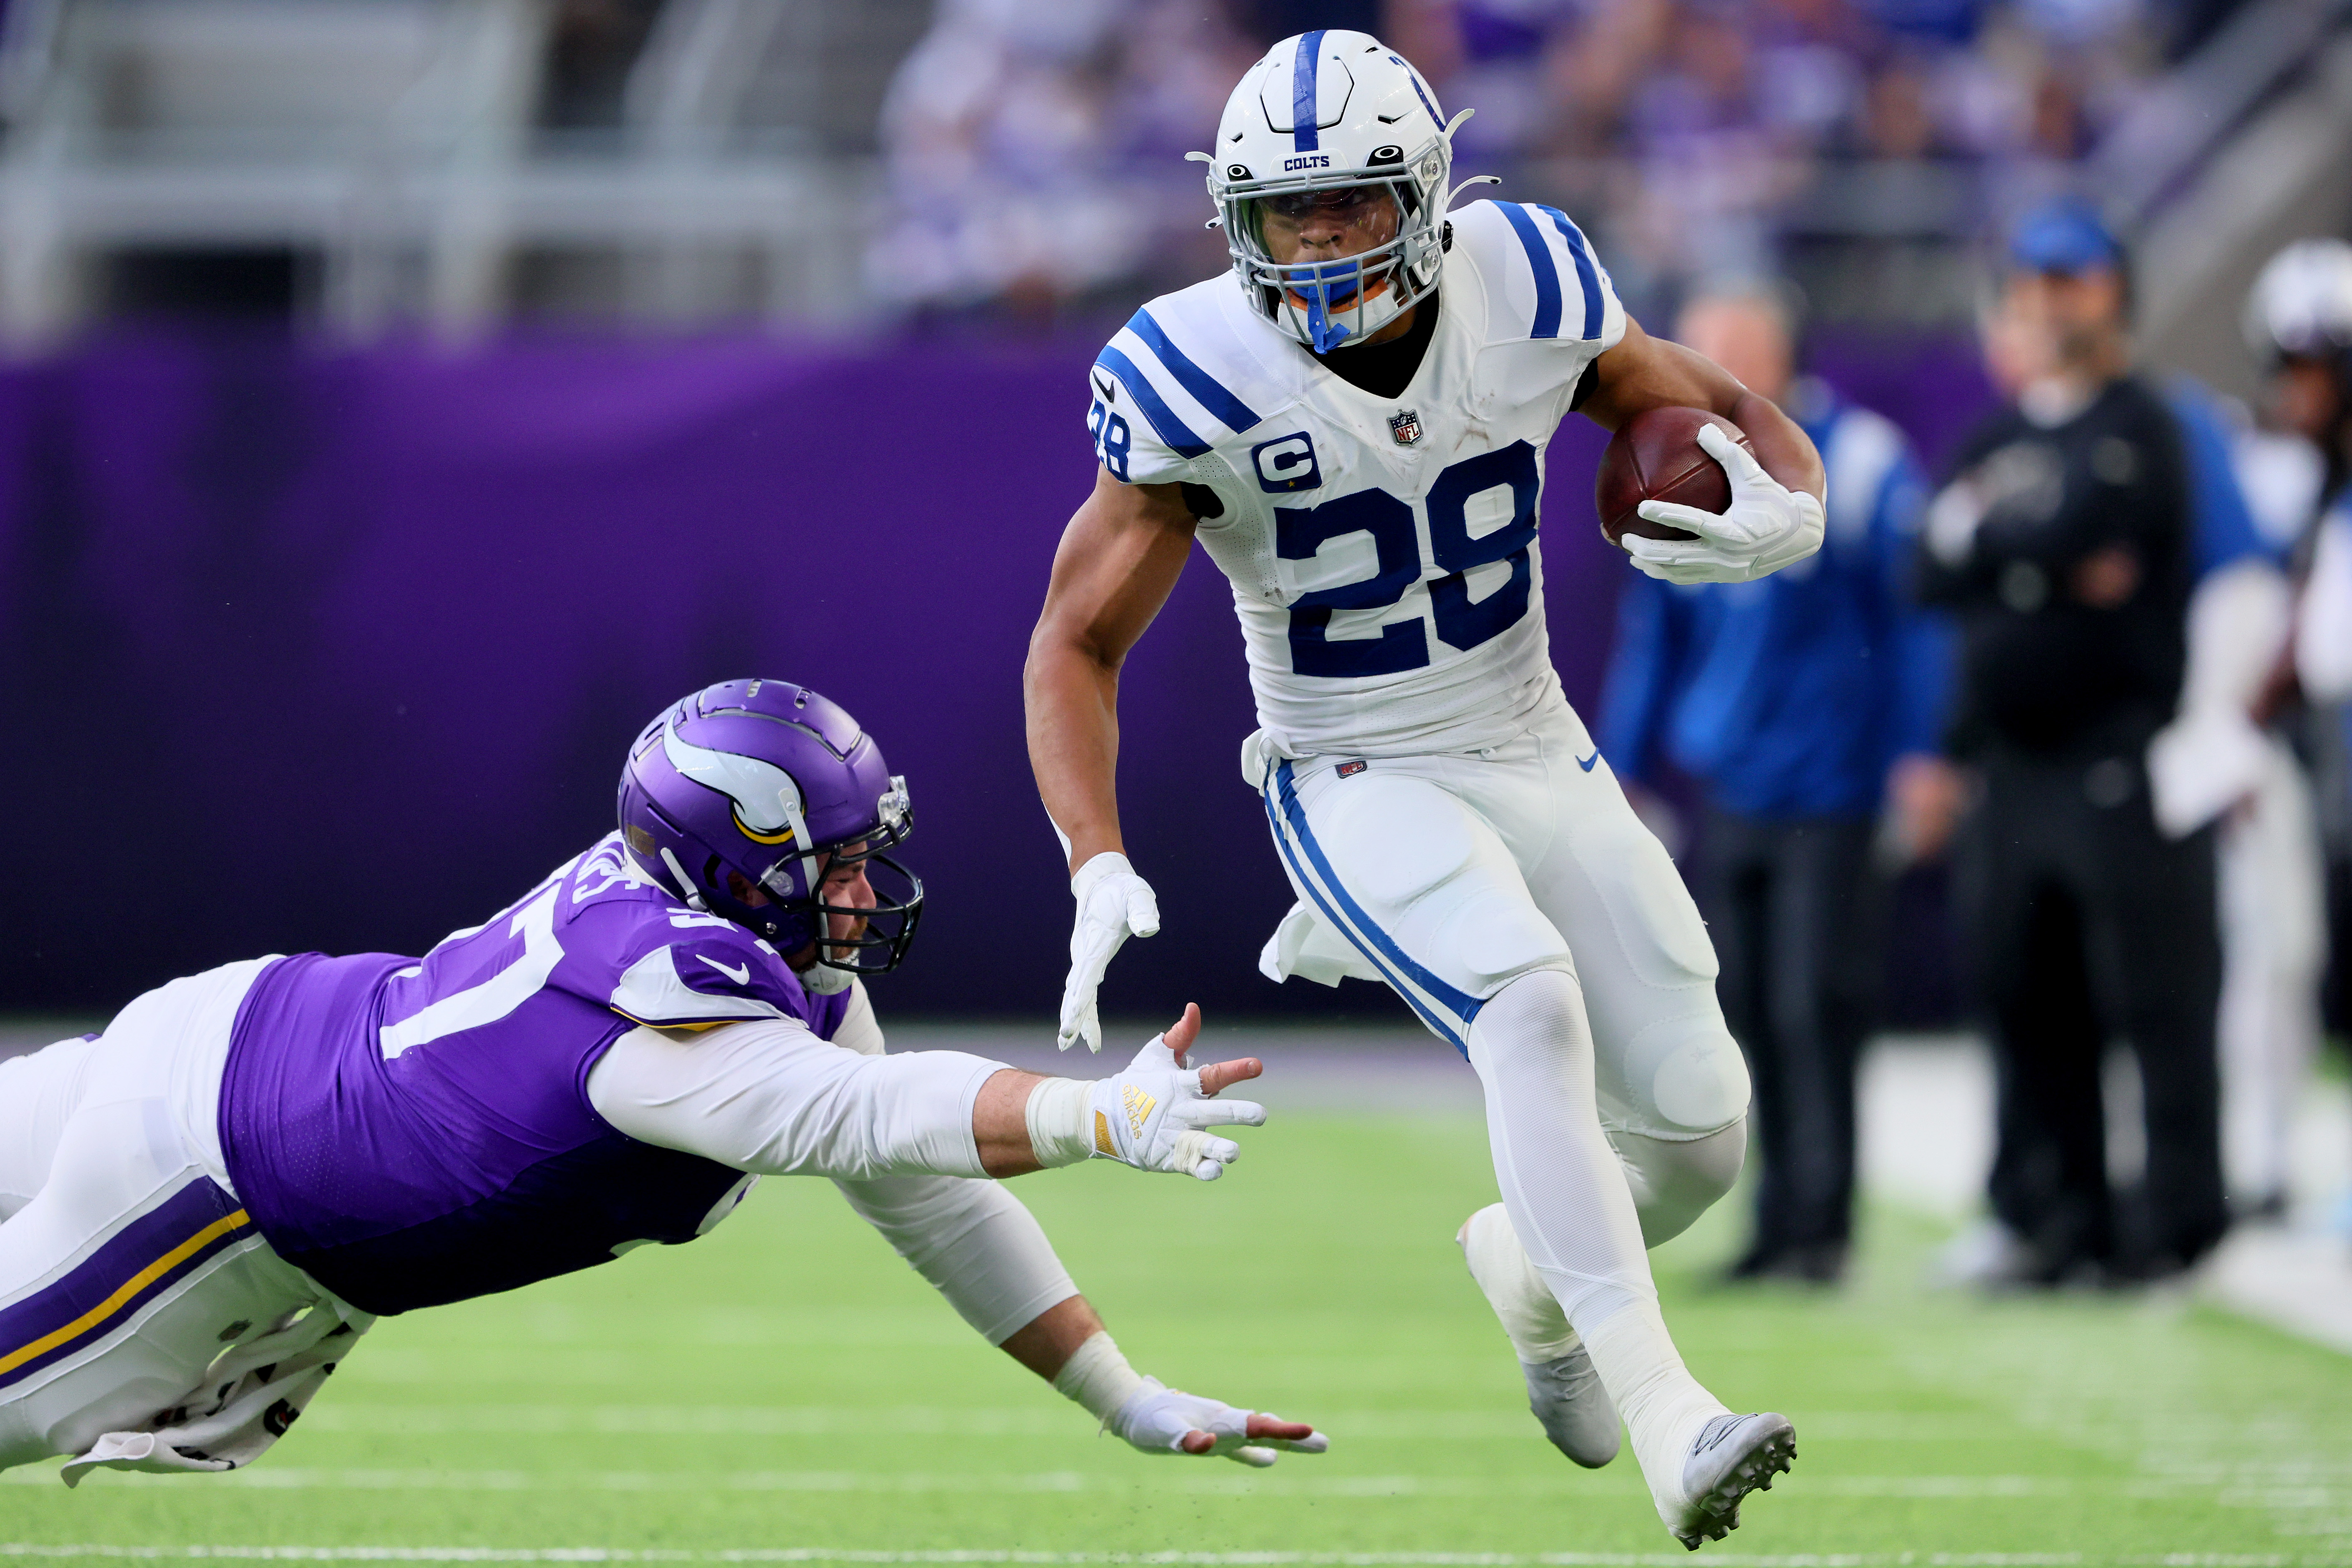 Running back Jonathan Taylor (#28) of the Indianapolis Colts rushes in the game against the Minnesota Vikings at U.S. Bank Stadium in Minneapolis, Minnesota, December 17, 2022. /CFP